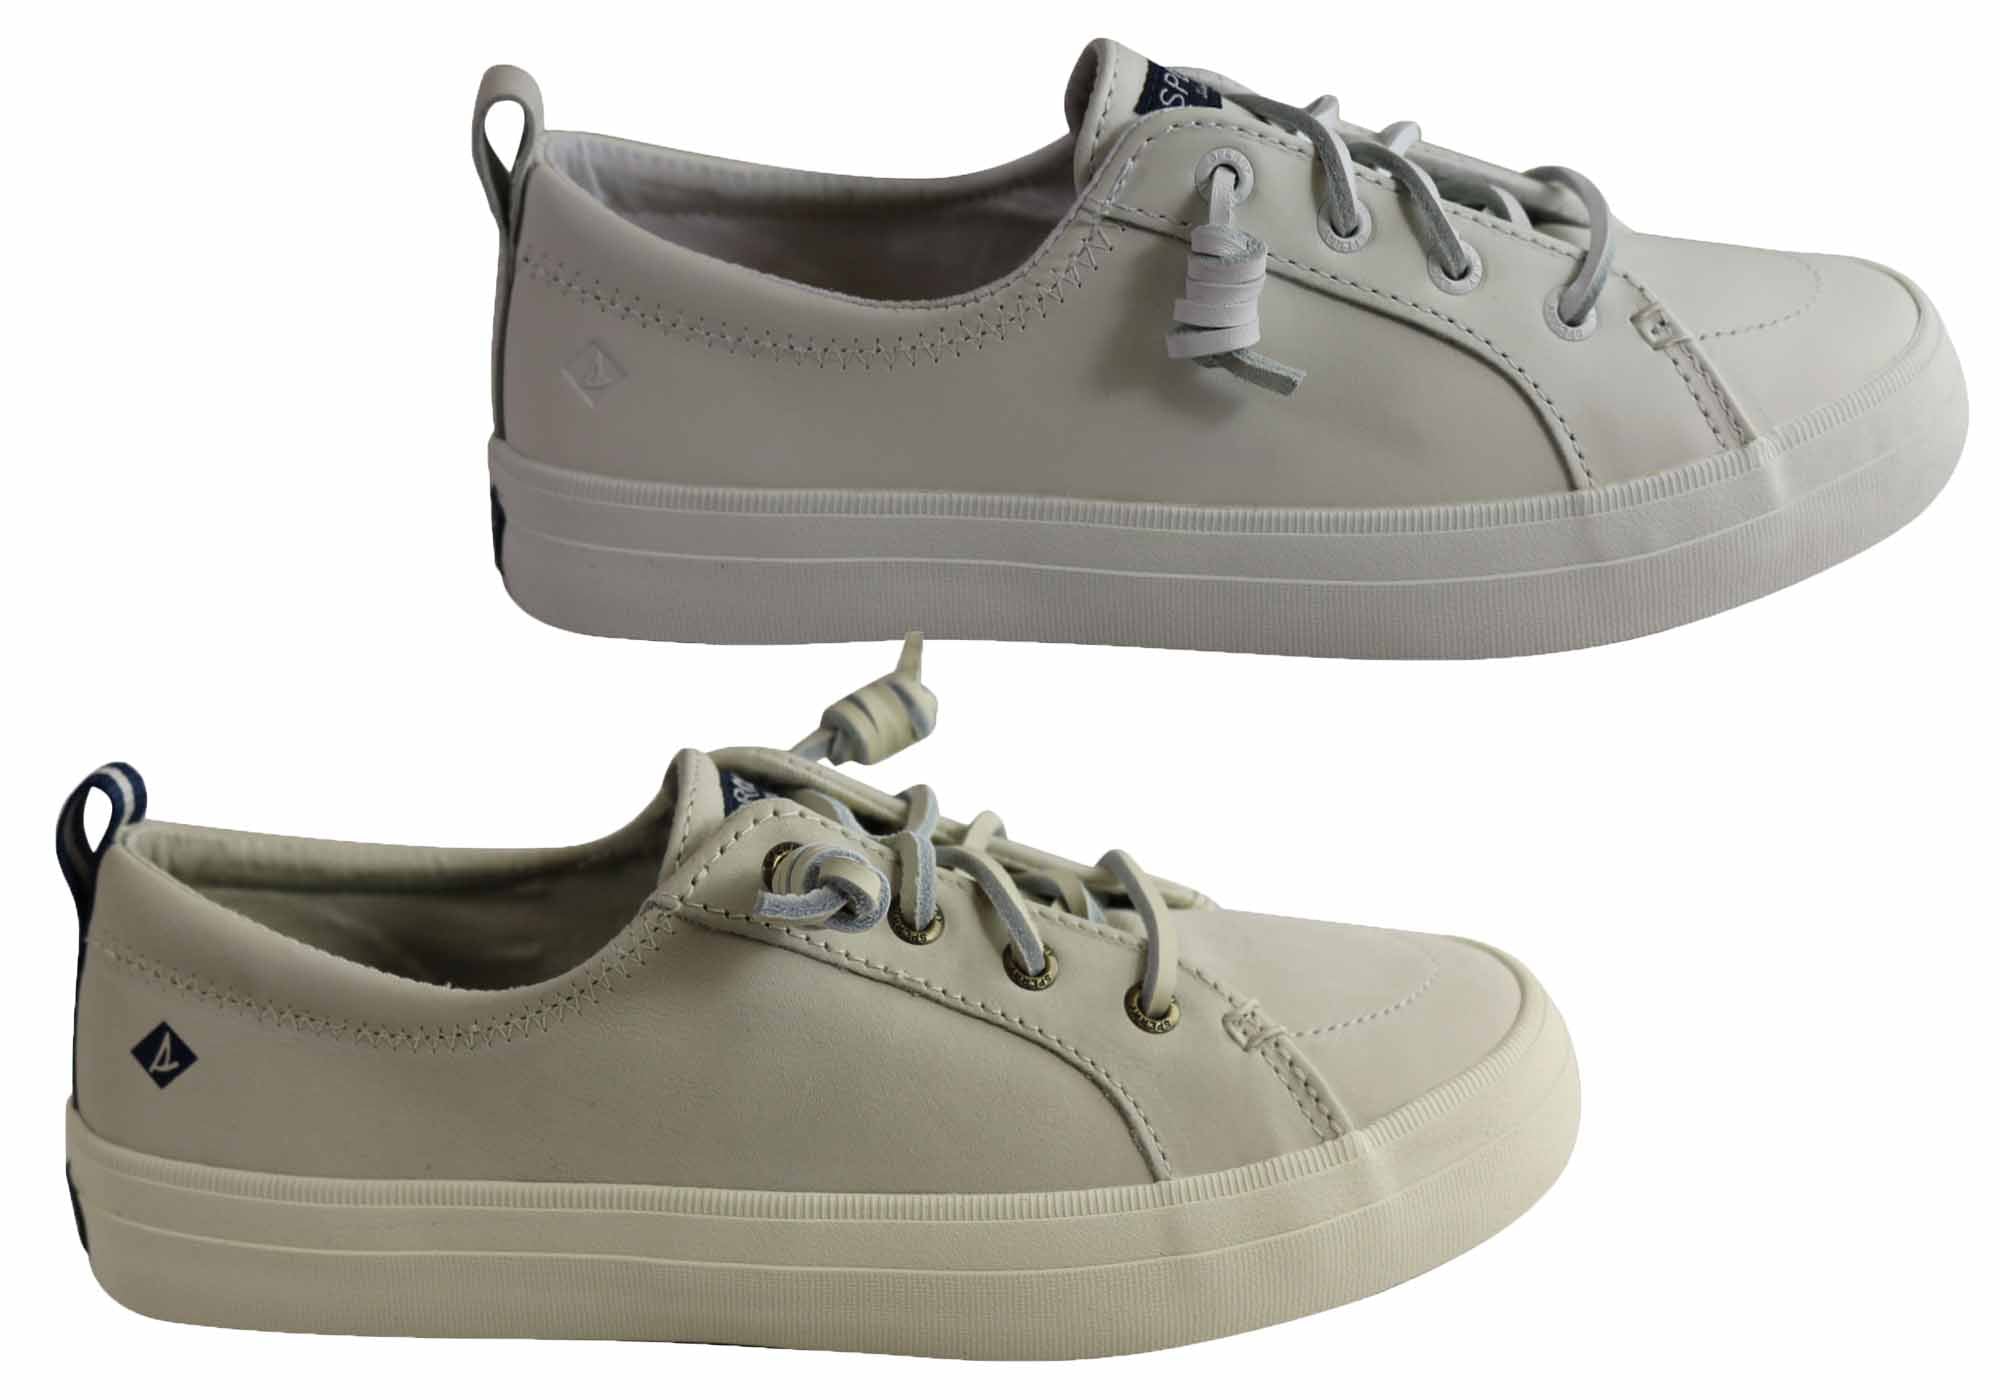 sperry crest vibe leather sneaker